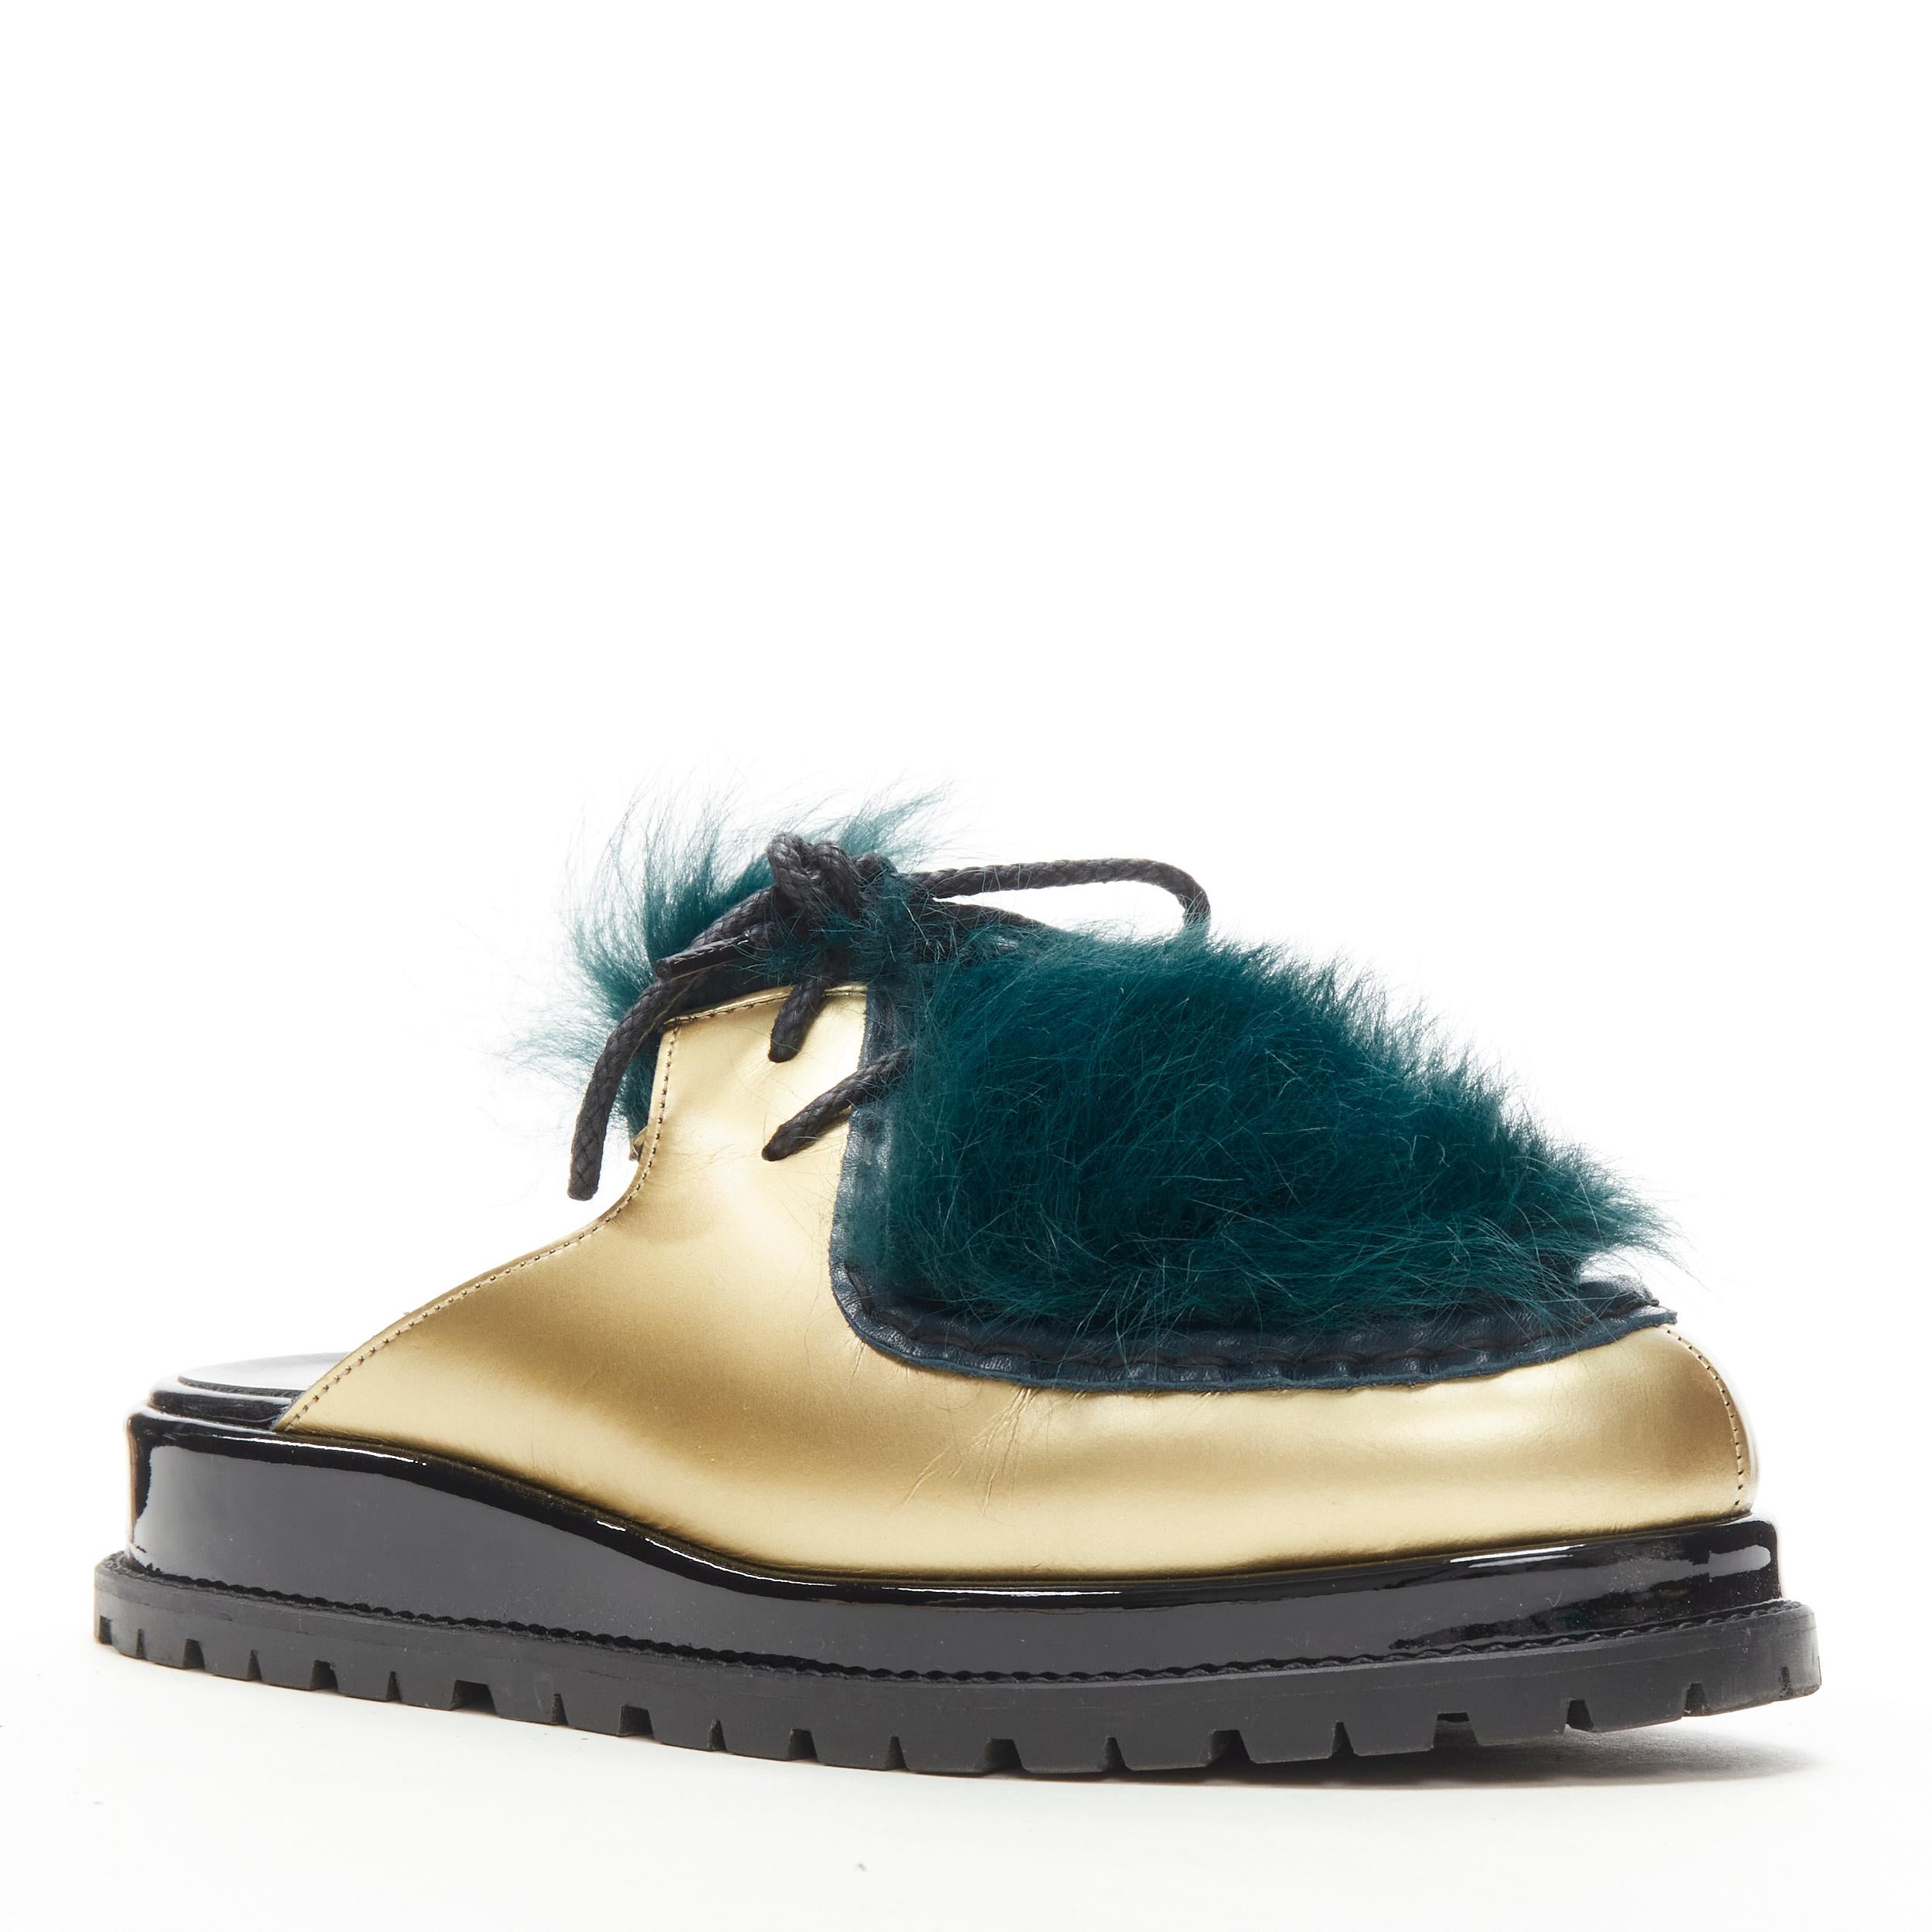 SACAI metallic gold leather teal blue fur slip on mule Vibram sole EU37 
Reference: ANWU/A00325 
Brand: Sacai 
Designer: Chitose Abe 
Collection: 2017 Runway 
Material: Leather 
Color: Gold 
Pattern: Solid 
Closure: Lace 
Made in: Spain 

CONDITION: